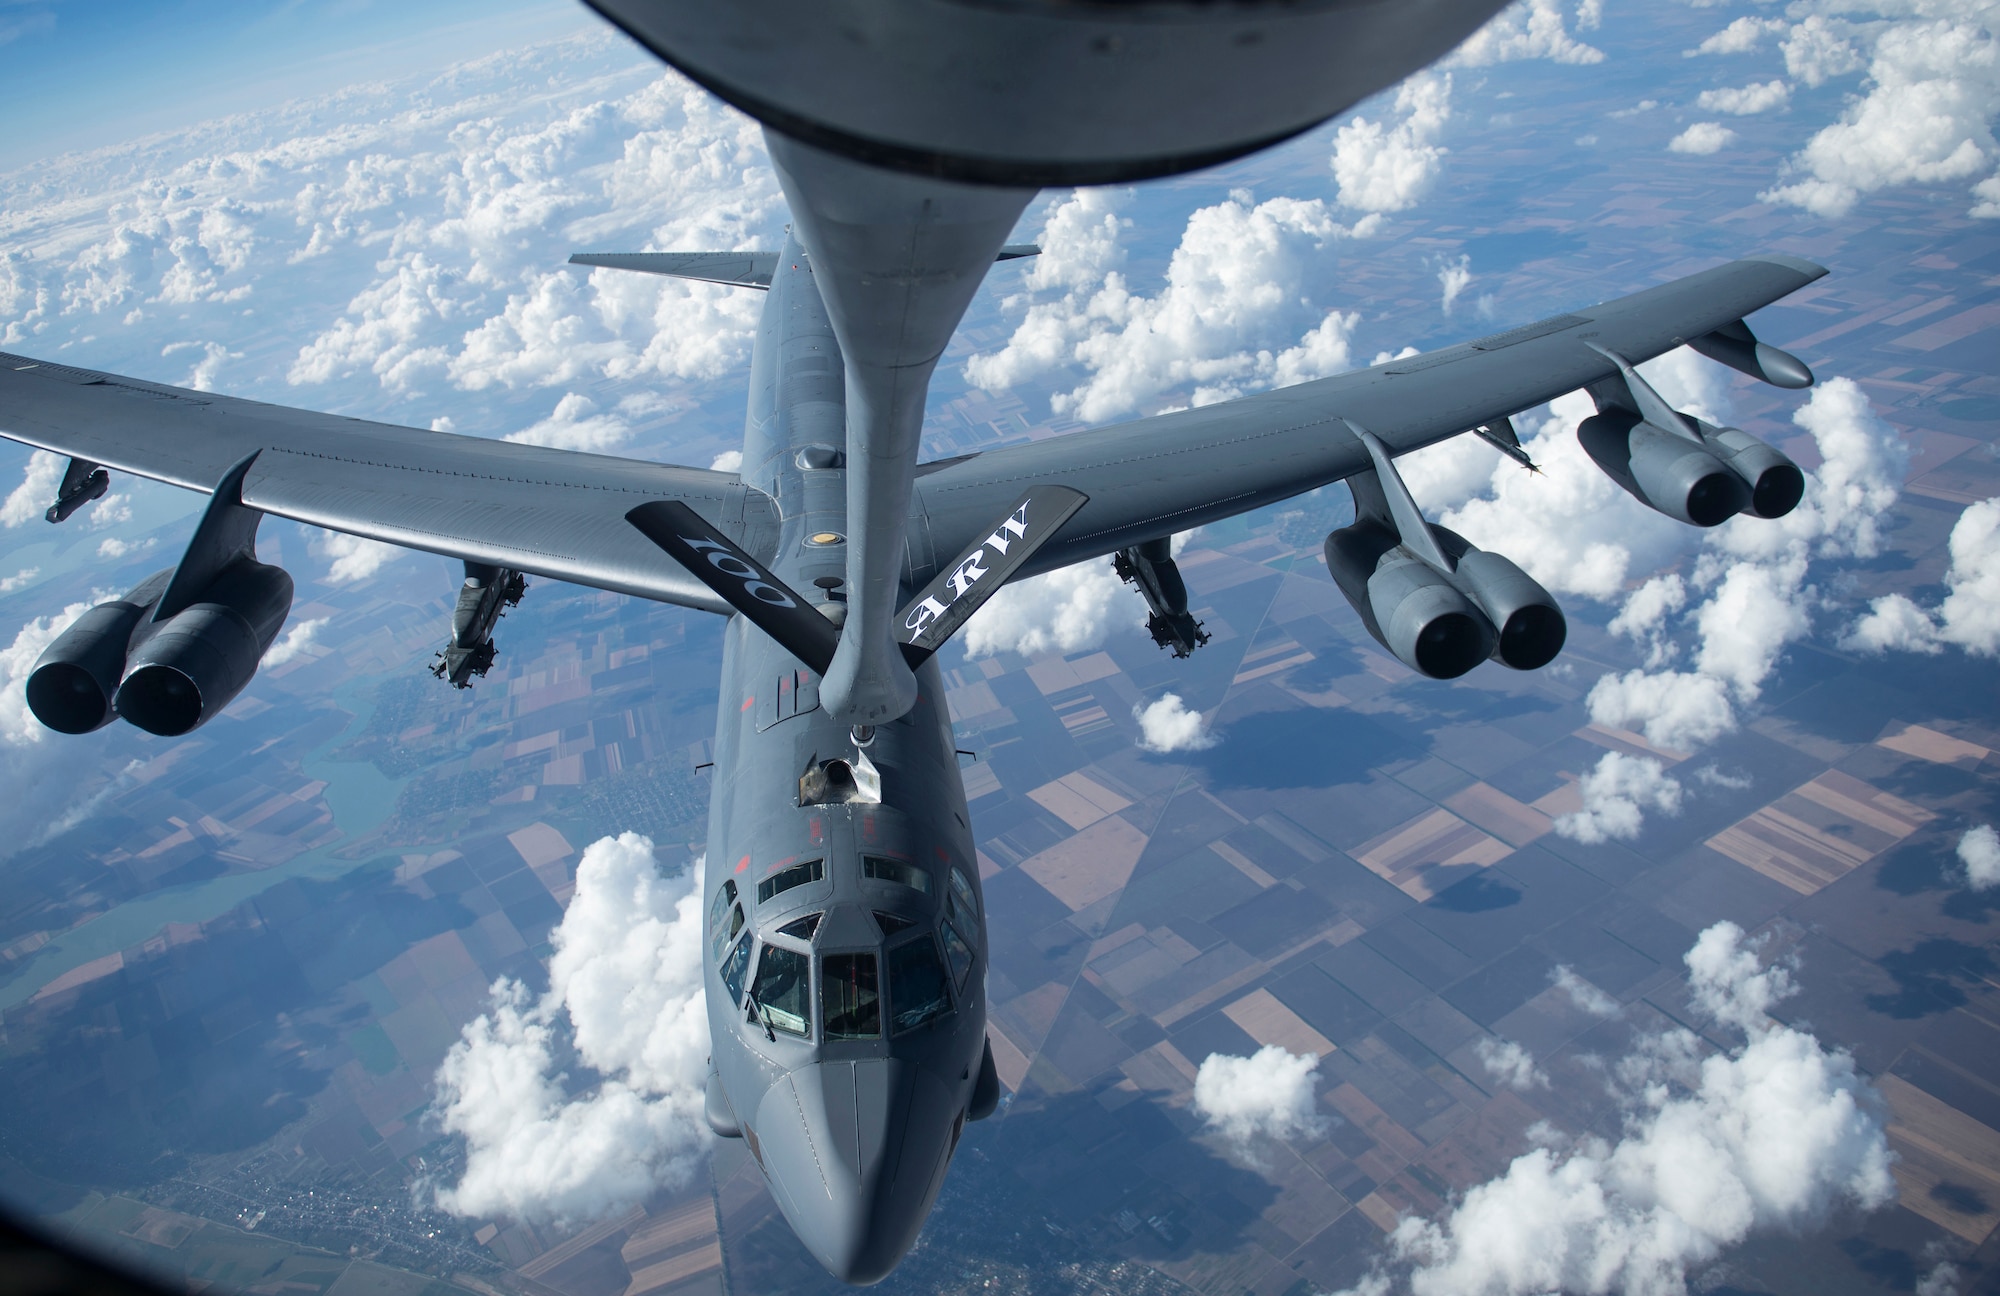 A U.S. Air Force B-52 Stratofortress approaches a KC-135 Stratotanker from the 100th Air Refueling Wing, RAF Mildenhall, England, before receiving fuel over Romania Sept. 13, 2018. Training with NATO allies such Romania improves interoperability and demonstrates the United States’ commitment to regional security. (U.S. Air Force photo by Tech. Sgt. Emerson Nuñez)